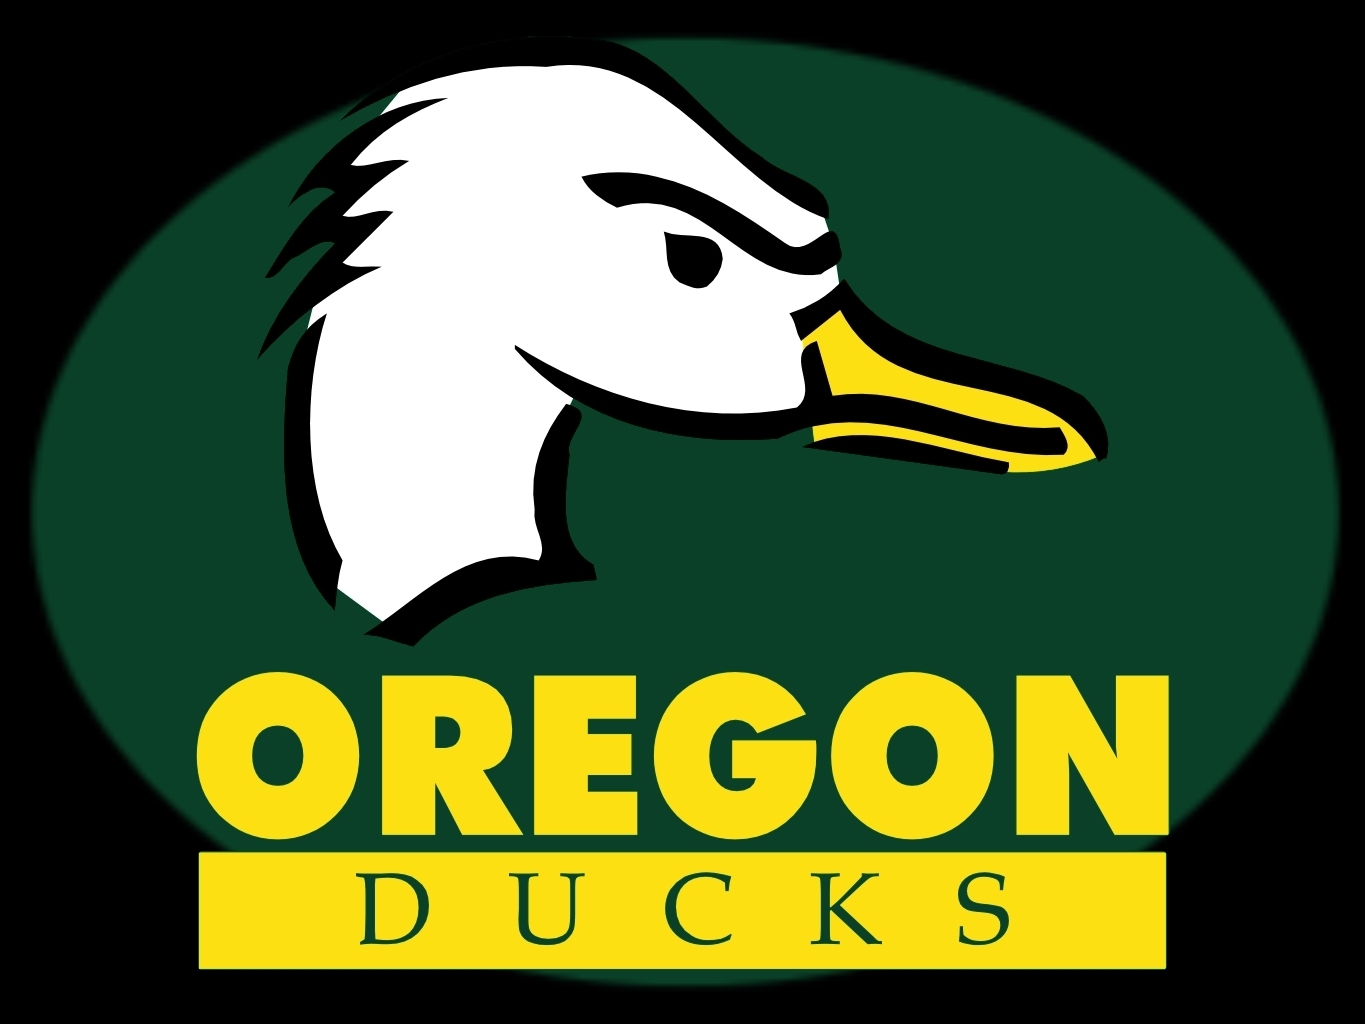 Oregon Ducks Logos Submited Image Pic2fly